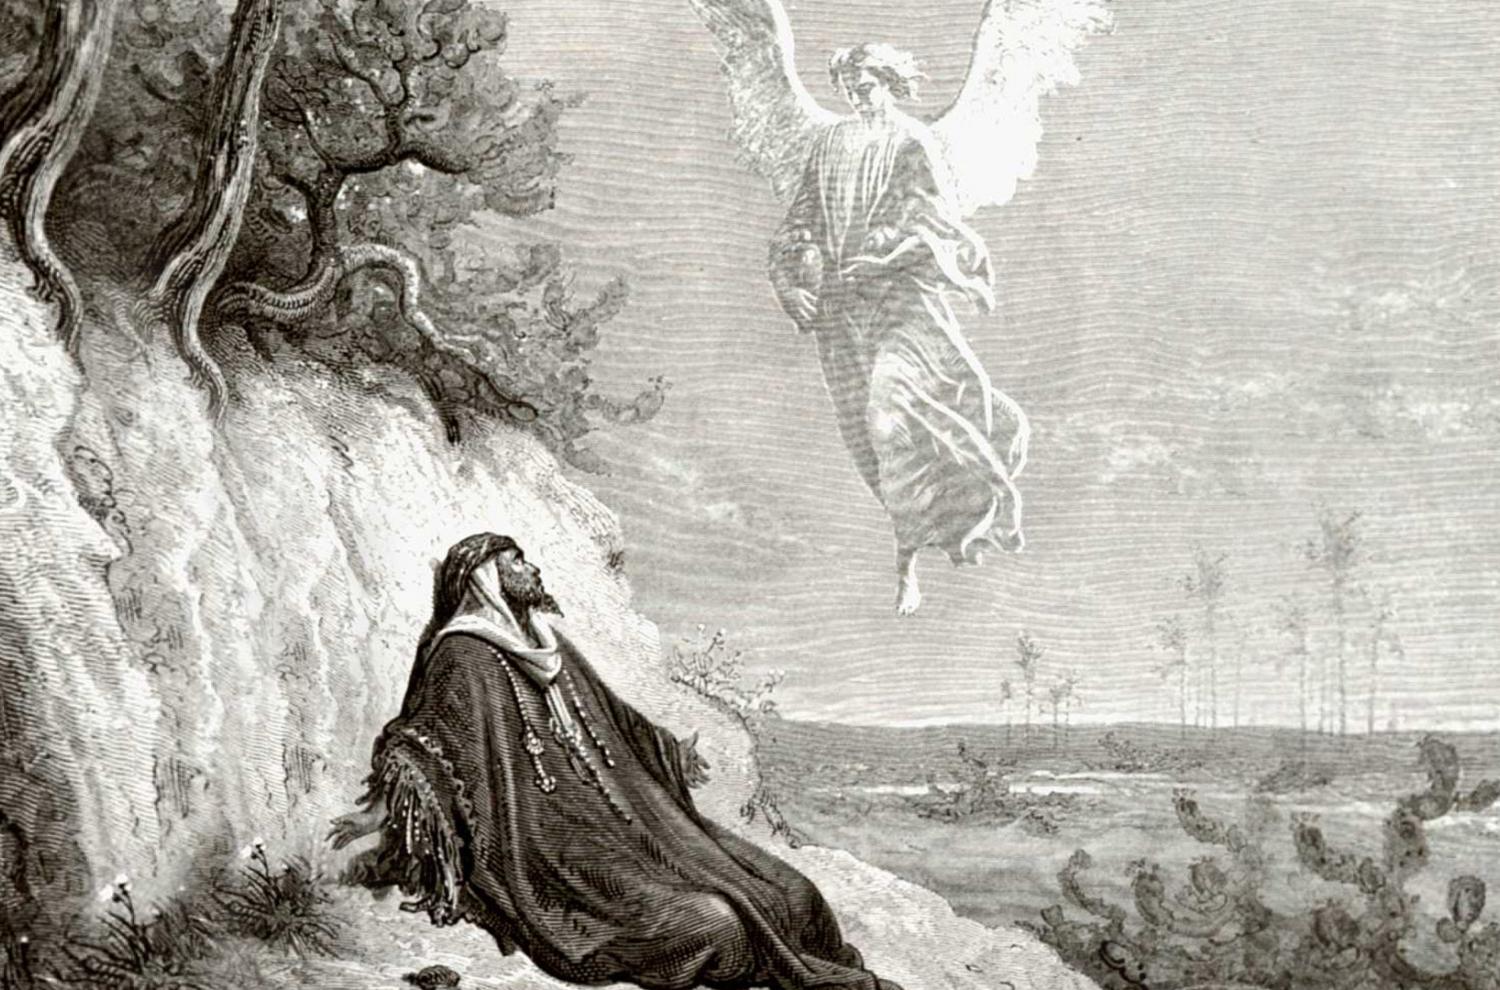 Illustration to the Bible: Angel brings food and drink to the prophet Elijah by Gustave Dore, 1877.